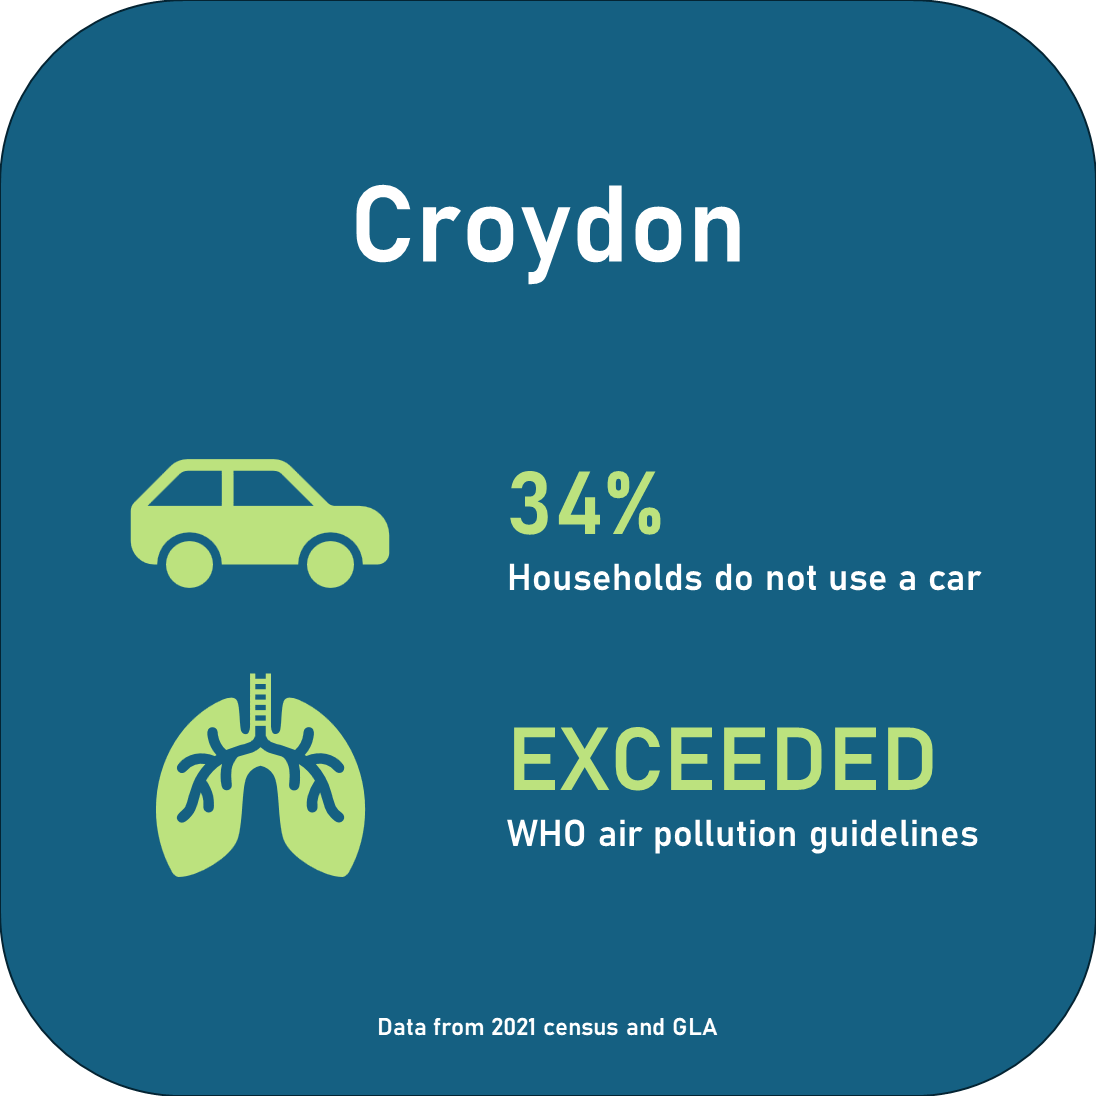 34% households do not use a car. Exceeded WHO air pollution guidelines.